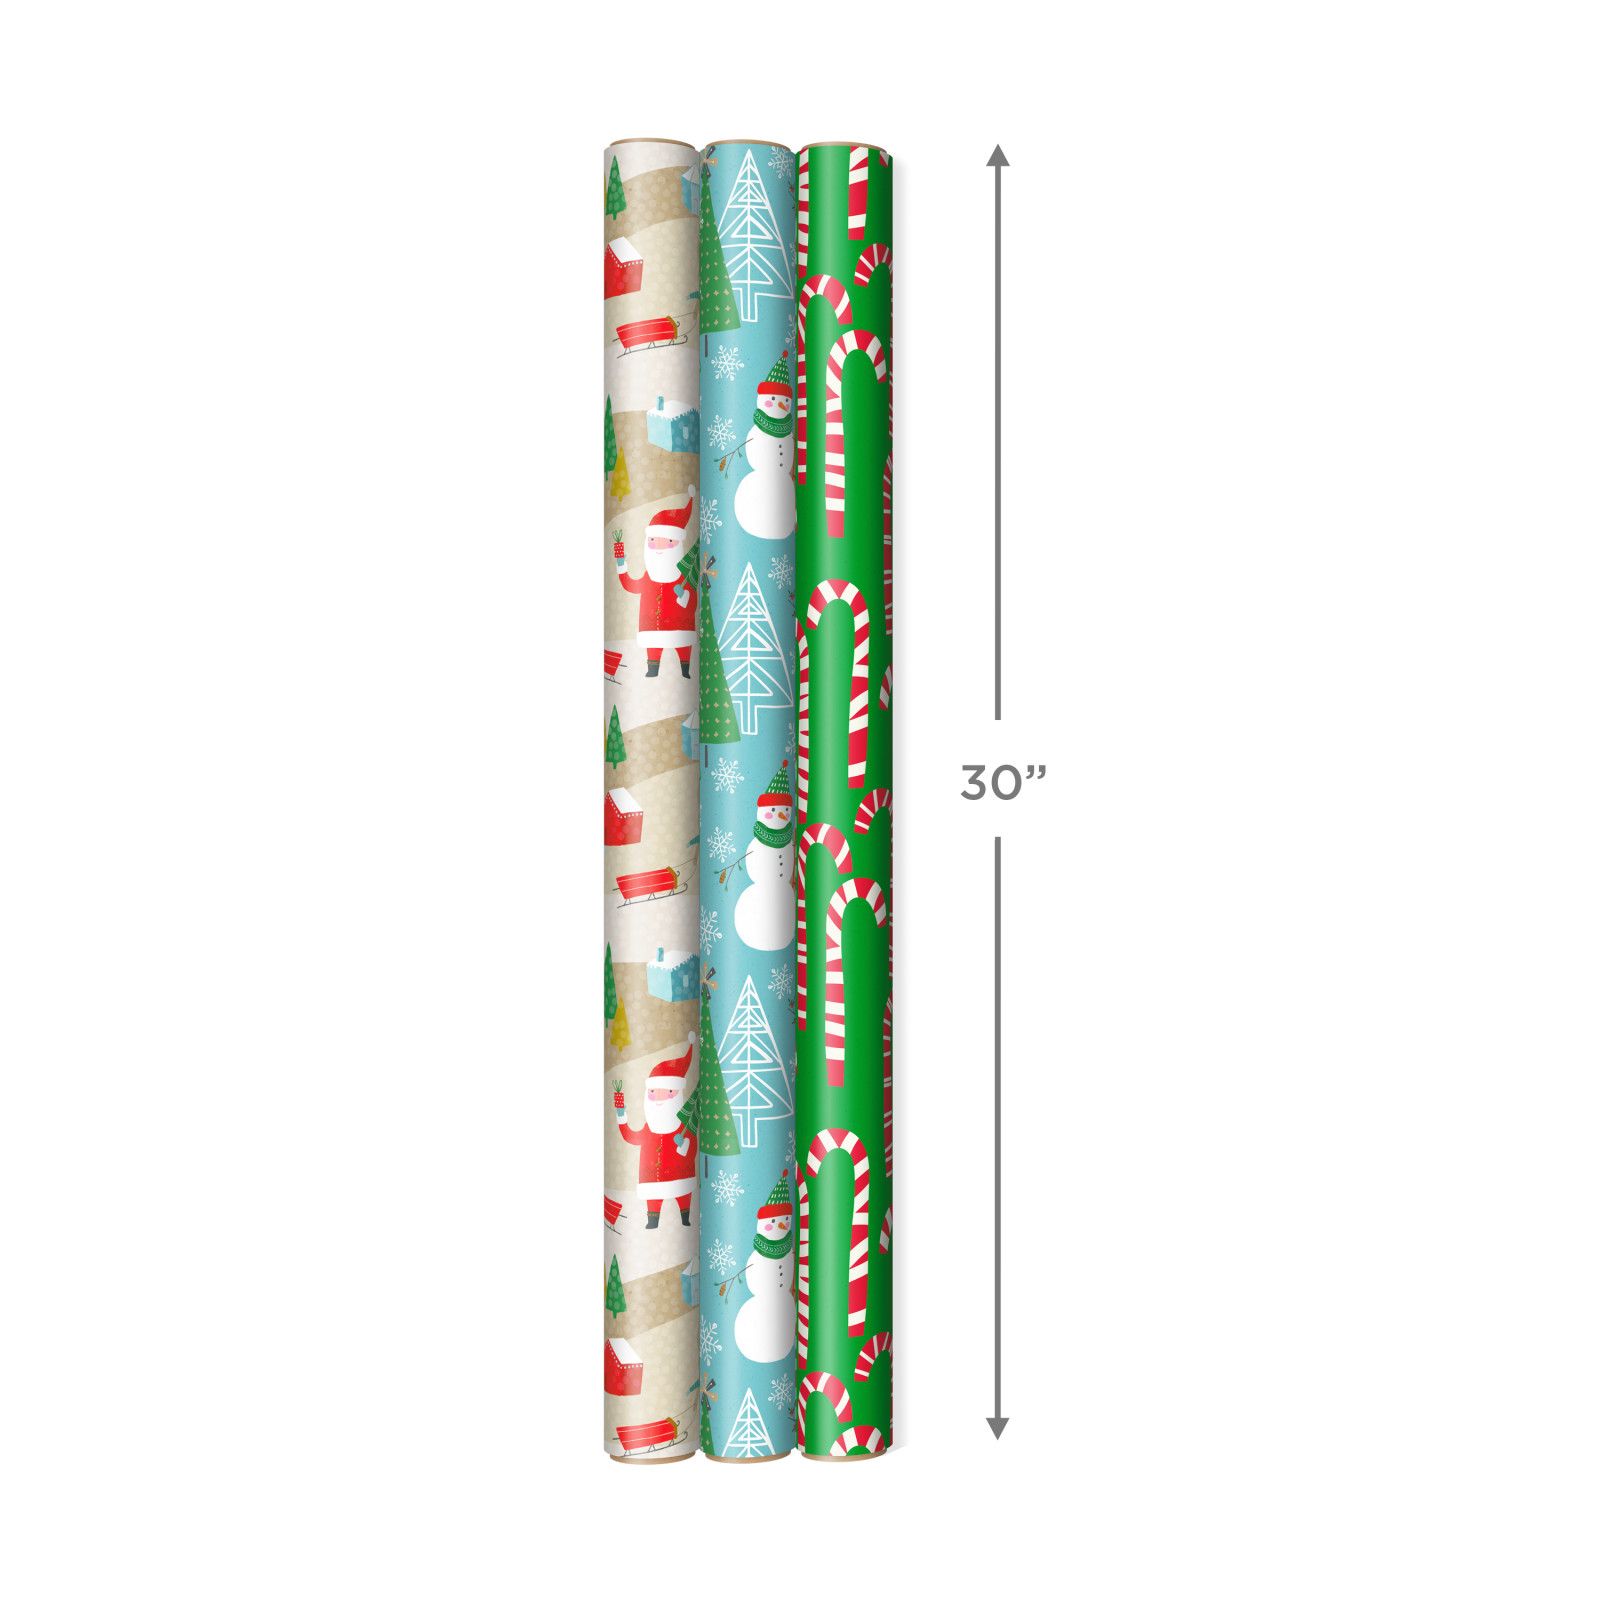  Hallmark Reversible White and Gold Wrapping Paper